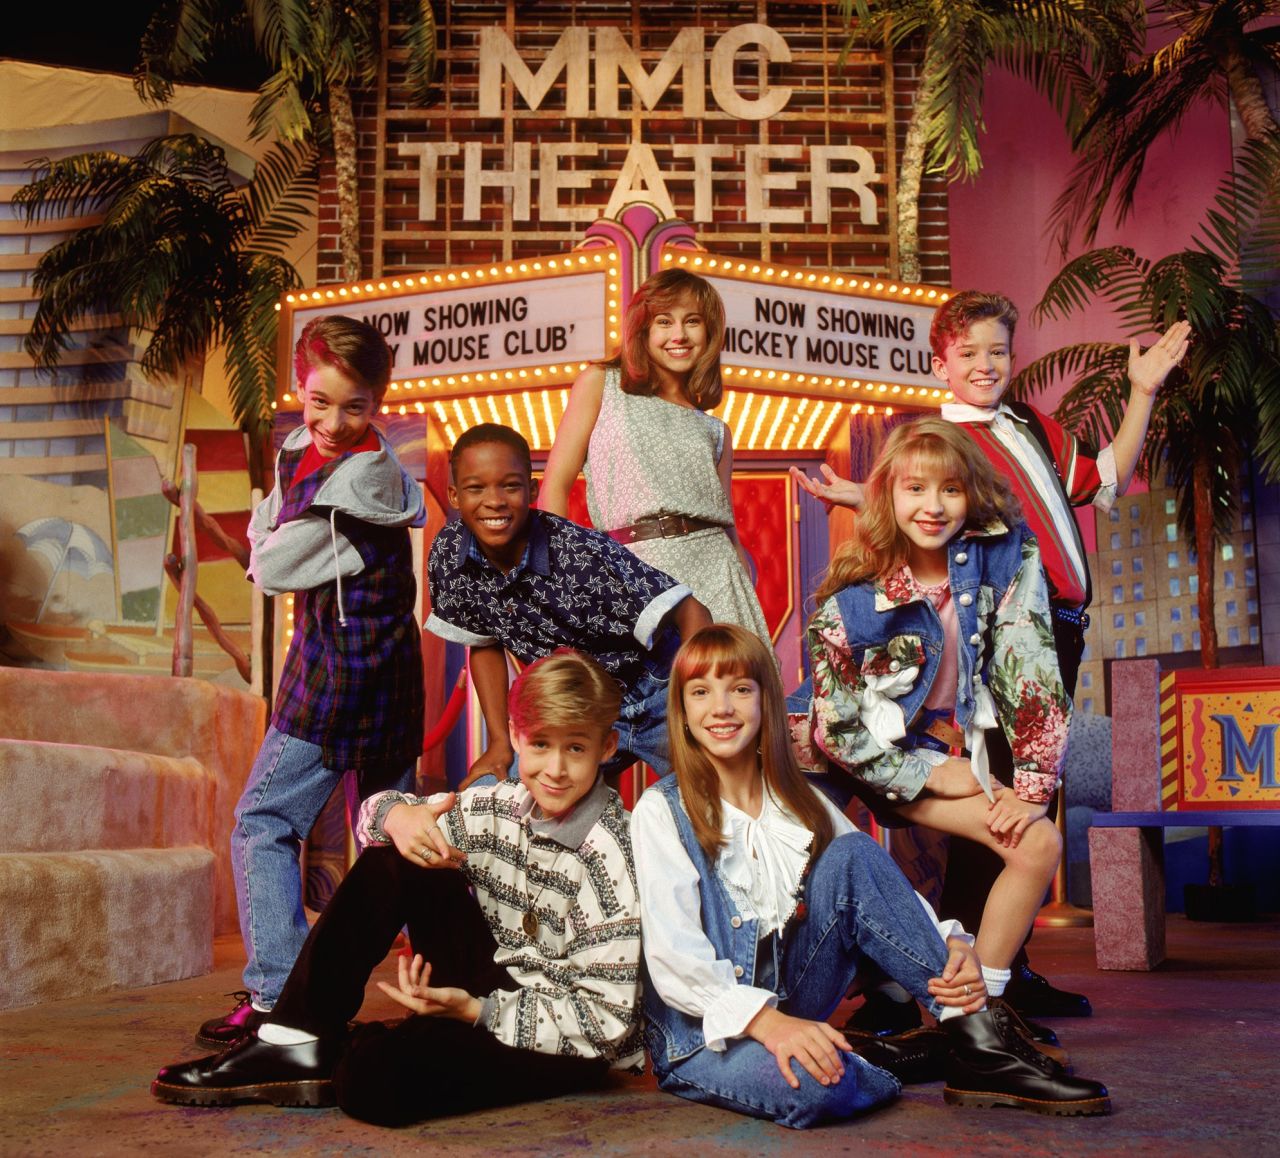 In 1993, Timberlake was singing, dancing and acting in the Disney Channel's "The Mickey Mouse Club" alongside a group that would later become a who's-who of teenage idols. Here, clockwise from upper center, are Nikki DeLoach, Timberlake, Christina Aguilera, Britney Spears, Ryan Gosling, T.J. Fantini and Tate Lynche.